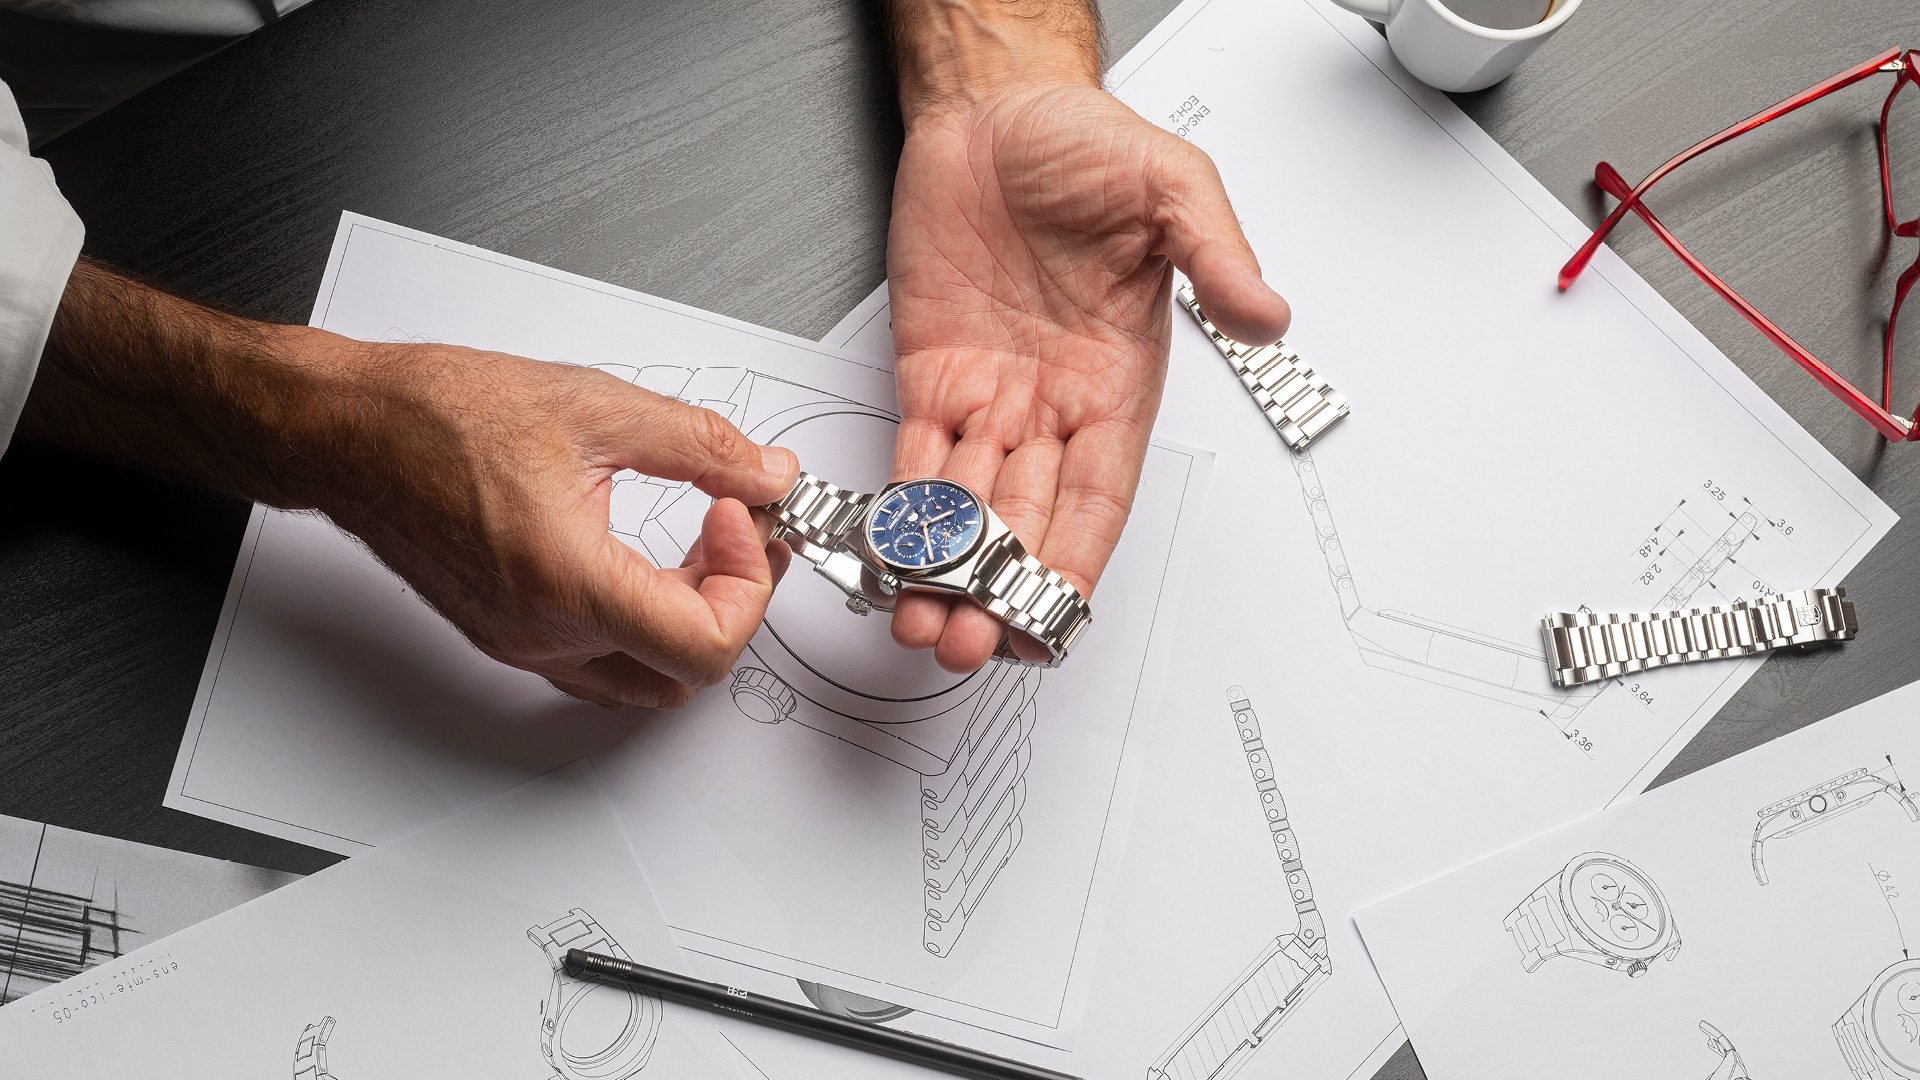 Highlife Perpetual Calendar Manufacture watch for man.   Automatic movement, blue dial, stainless-steel case, date, month and day counters, moonphase and stainless-steel integrated and interchangeable bracelet 